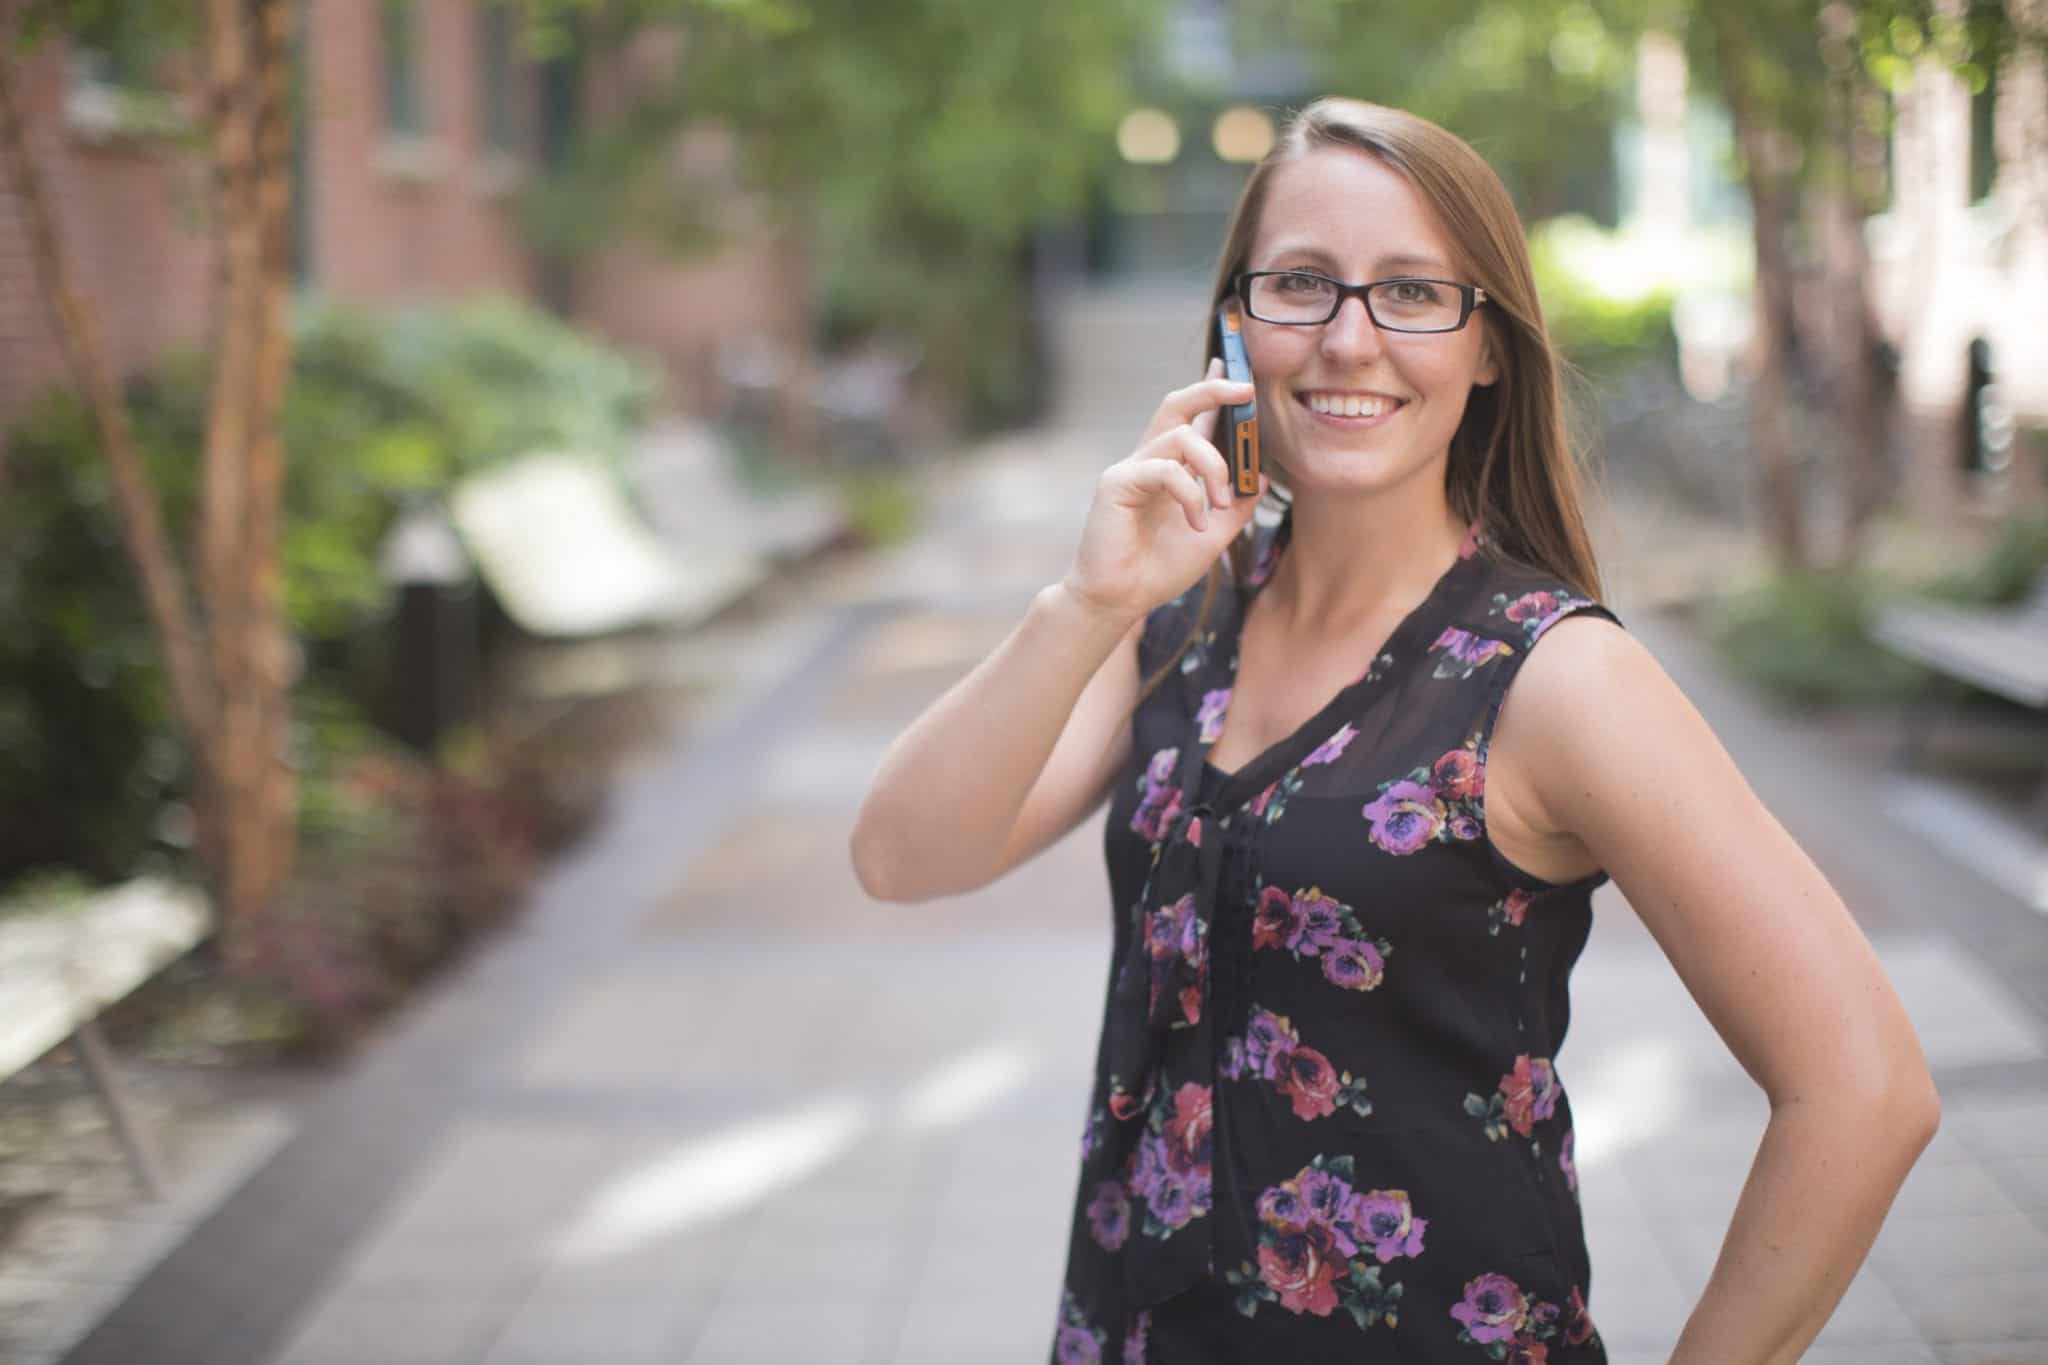 Turn Callers into Customers with an Answering Service